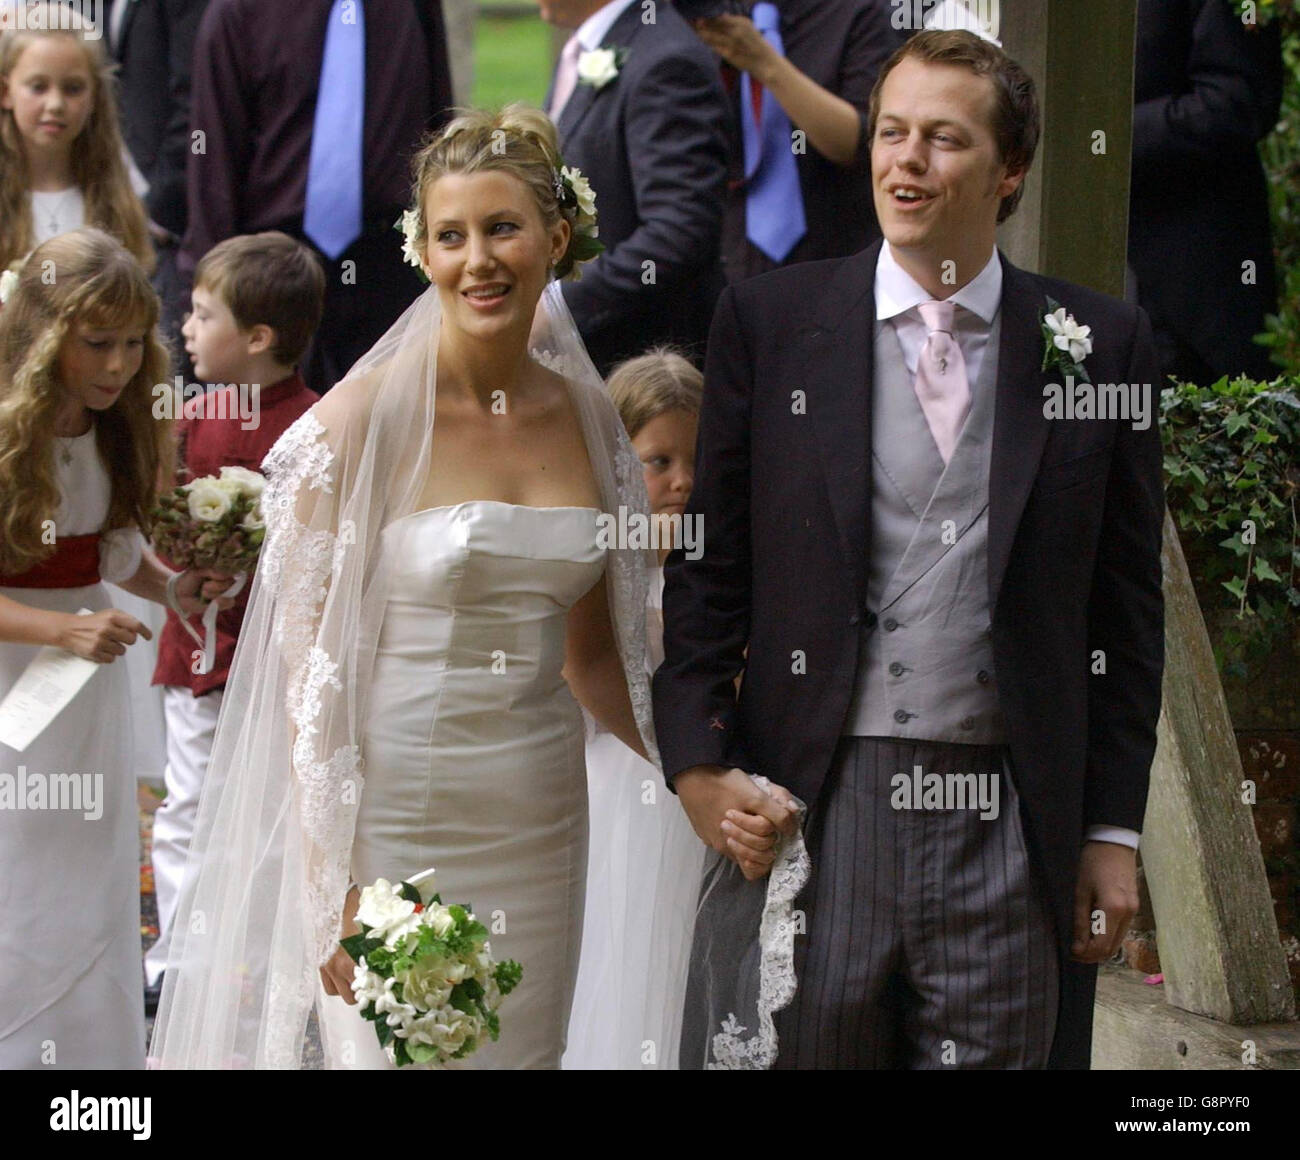 Tom Parker Bowles and his bride Sara leave St Nicholas Church, Rotherfield Greys, near Henley-on-Thames Saturday September 10, 2005, after their wedding See PA story ROYAL ParkerBowles. PRESS ASSOCIATION Photo. Photo credit should read: PA Stock Photo